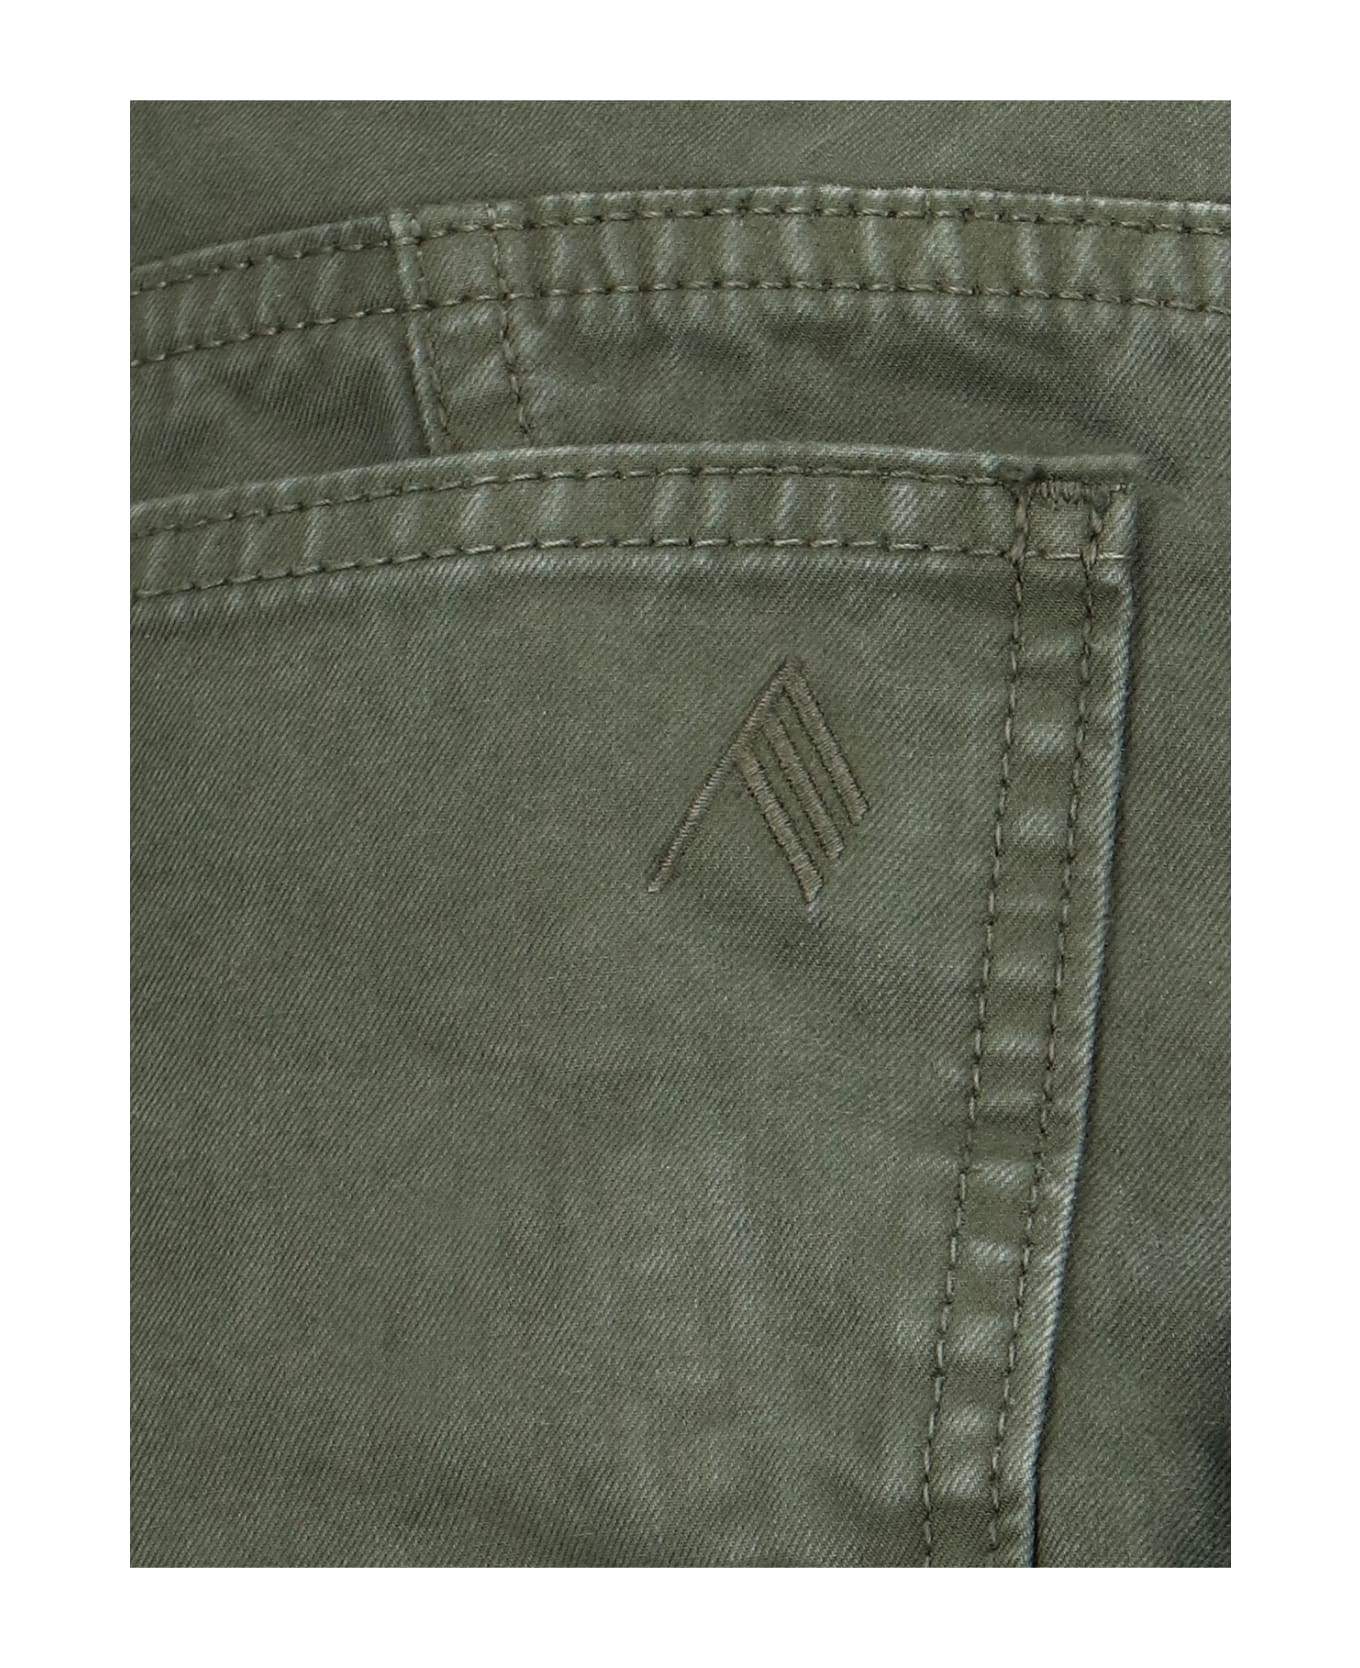 The Attico Cargo Pants Cut Out - Green